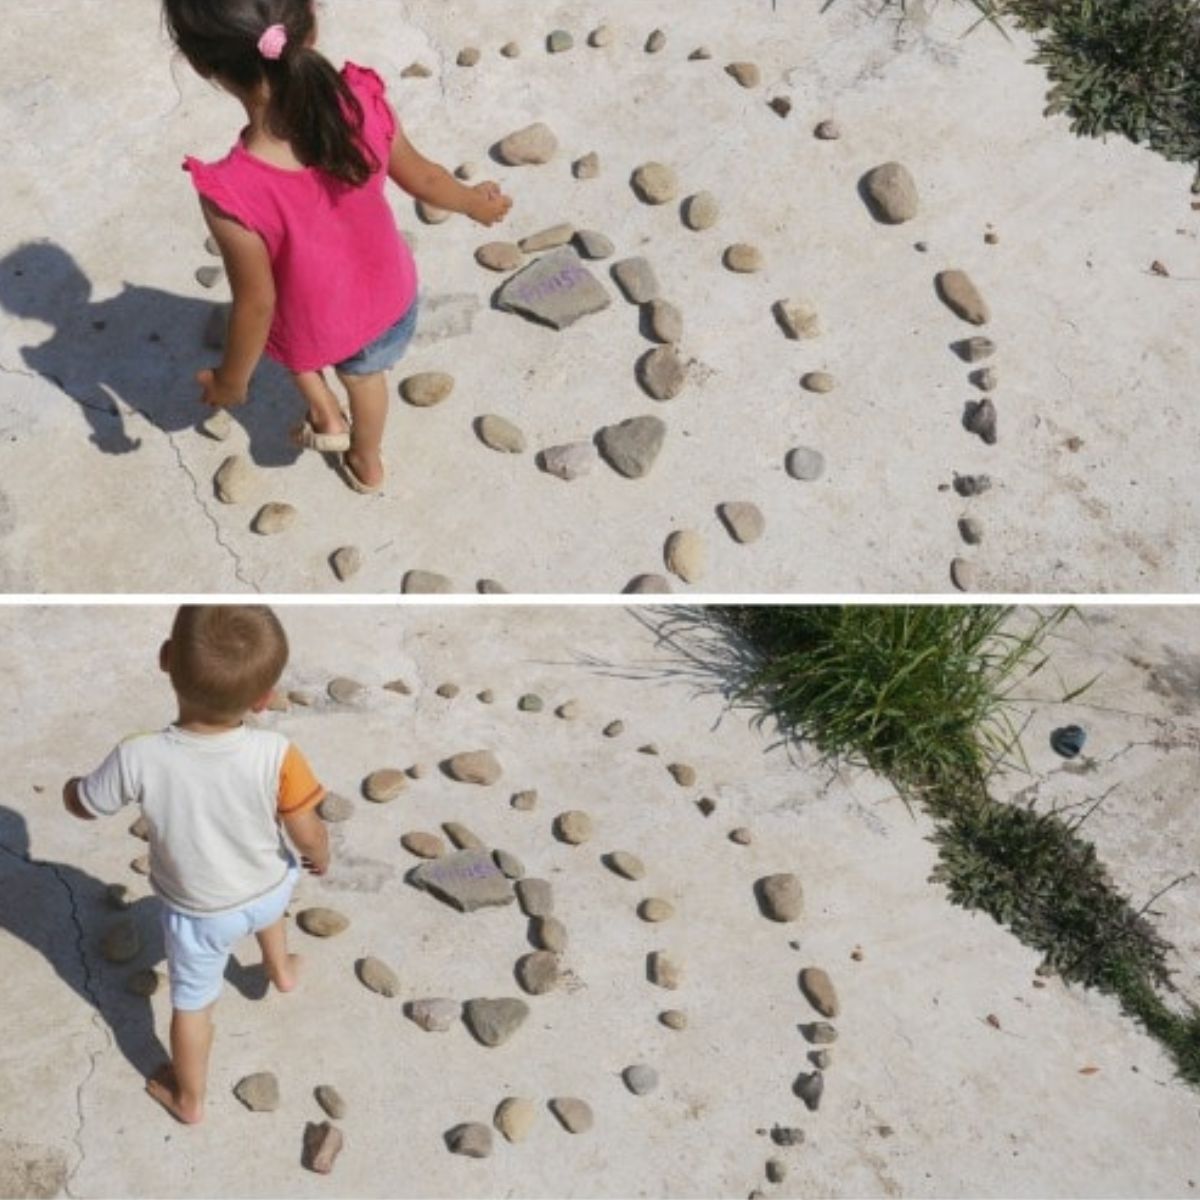 2 images of kids playing with rocks.